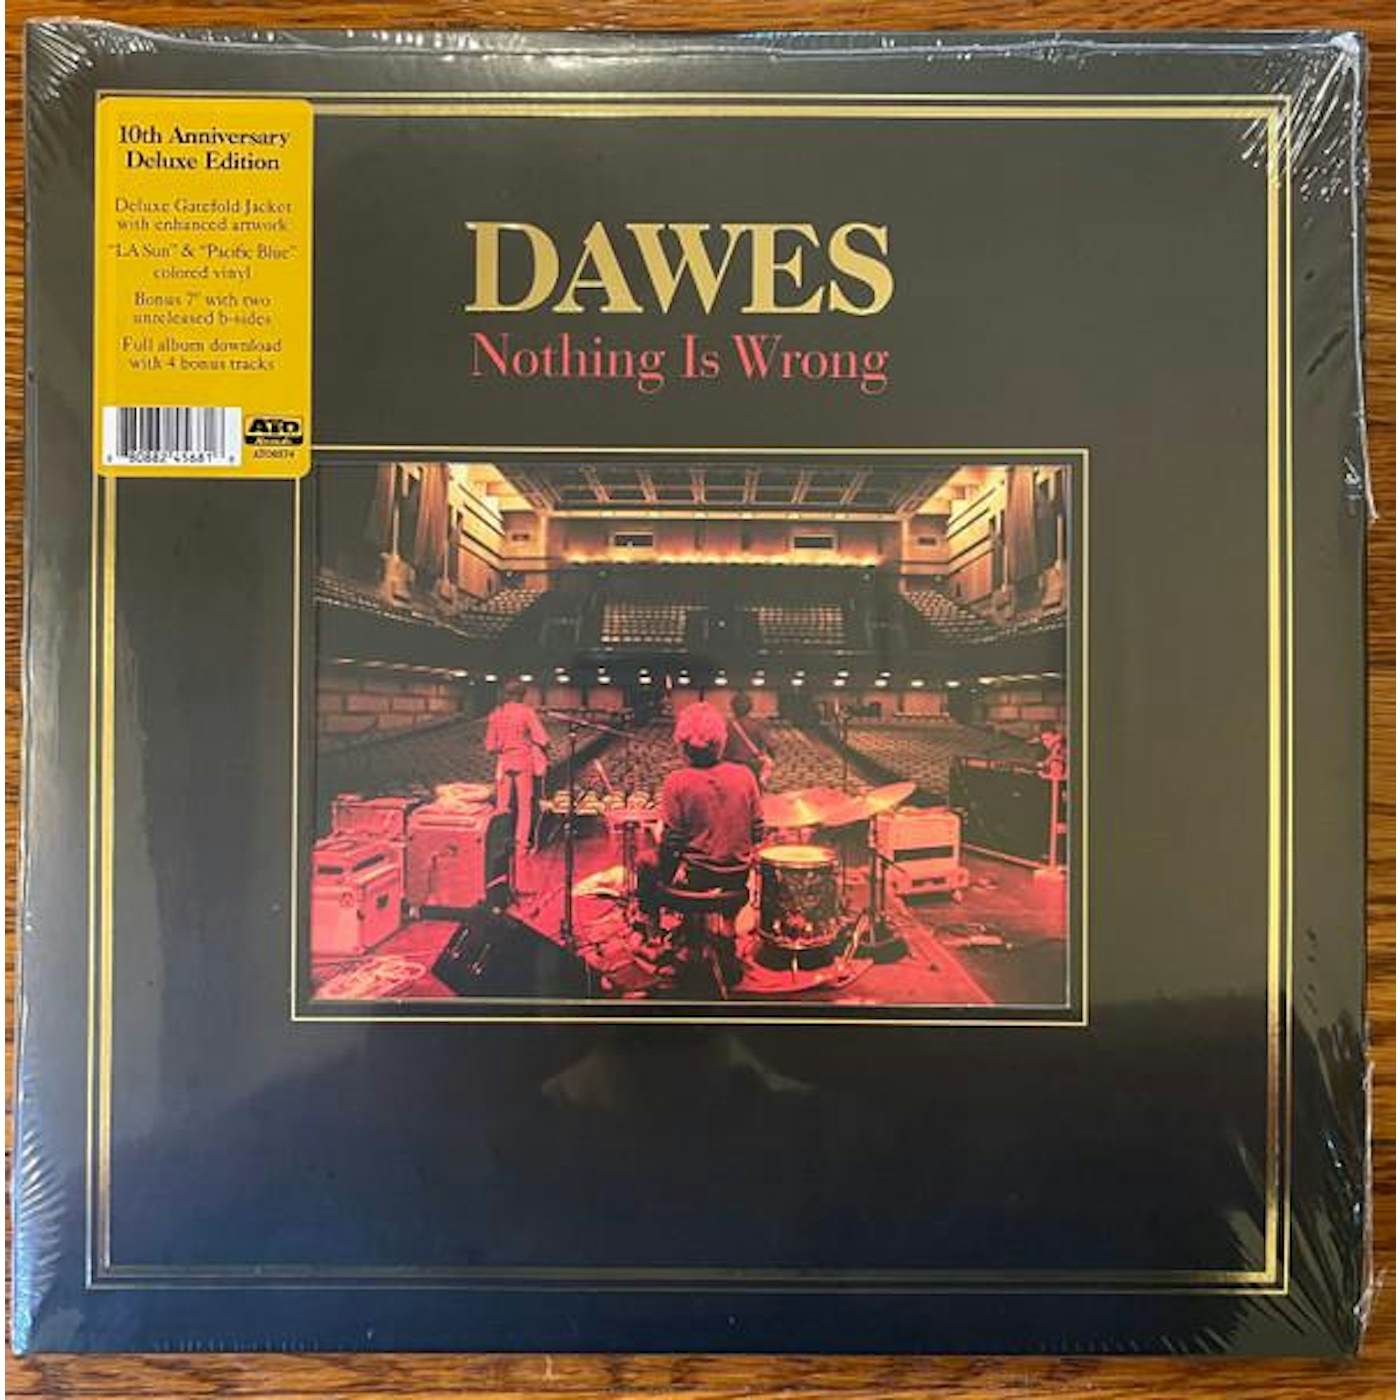 Dawes NOTHING IS WRONG (10TH ANNIVERSARY DELUXE EDITION/ORANGE & BLUE VINYL) Vinyl Record